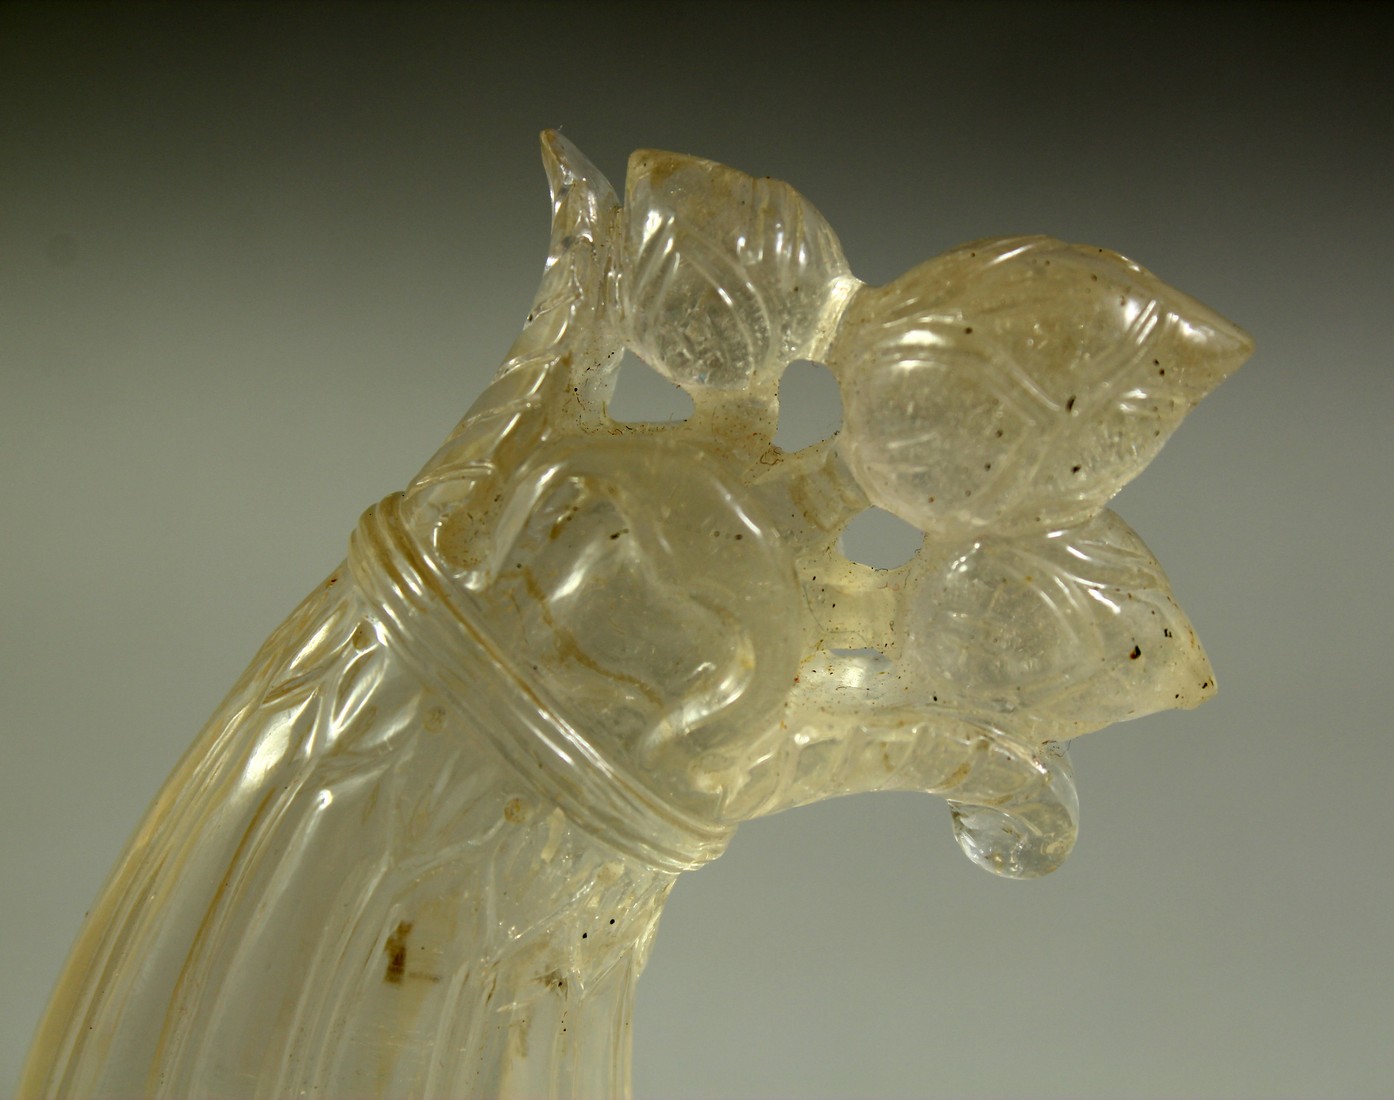 AN INDIAN CUT GLASS DAGGER HANDLE with flowerhead decoration, possibly rock crystal. 13.5cm long - Image 3 of 4